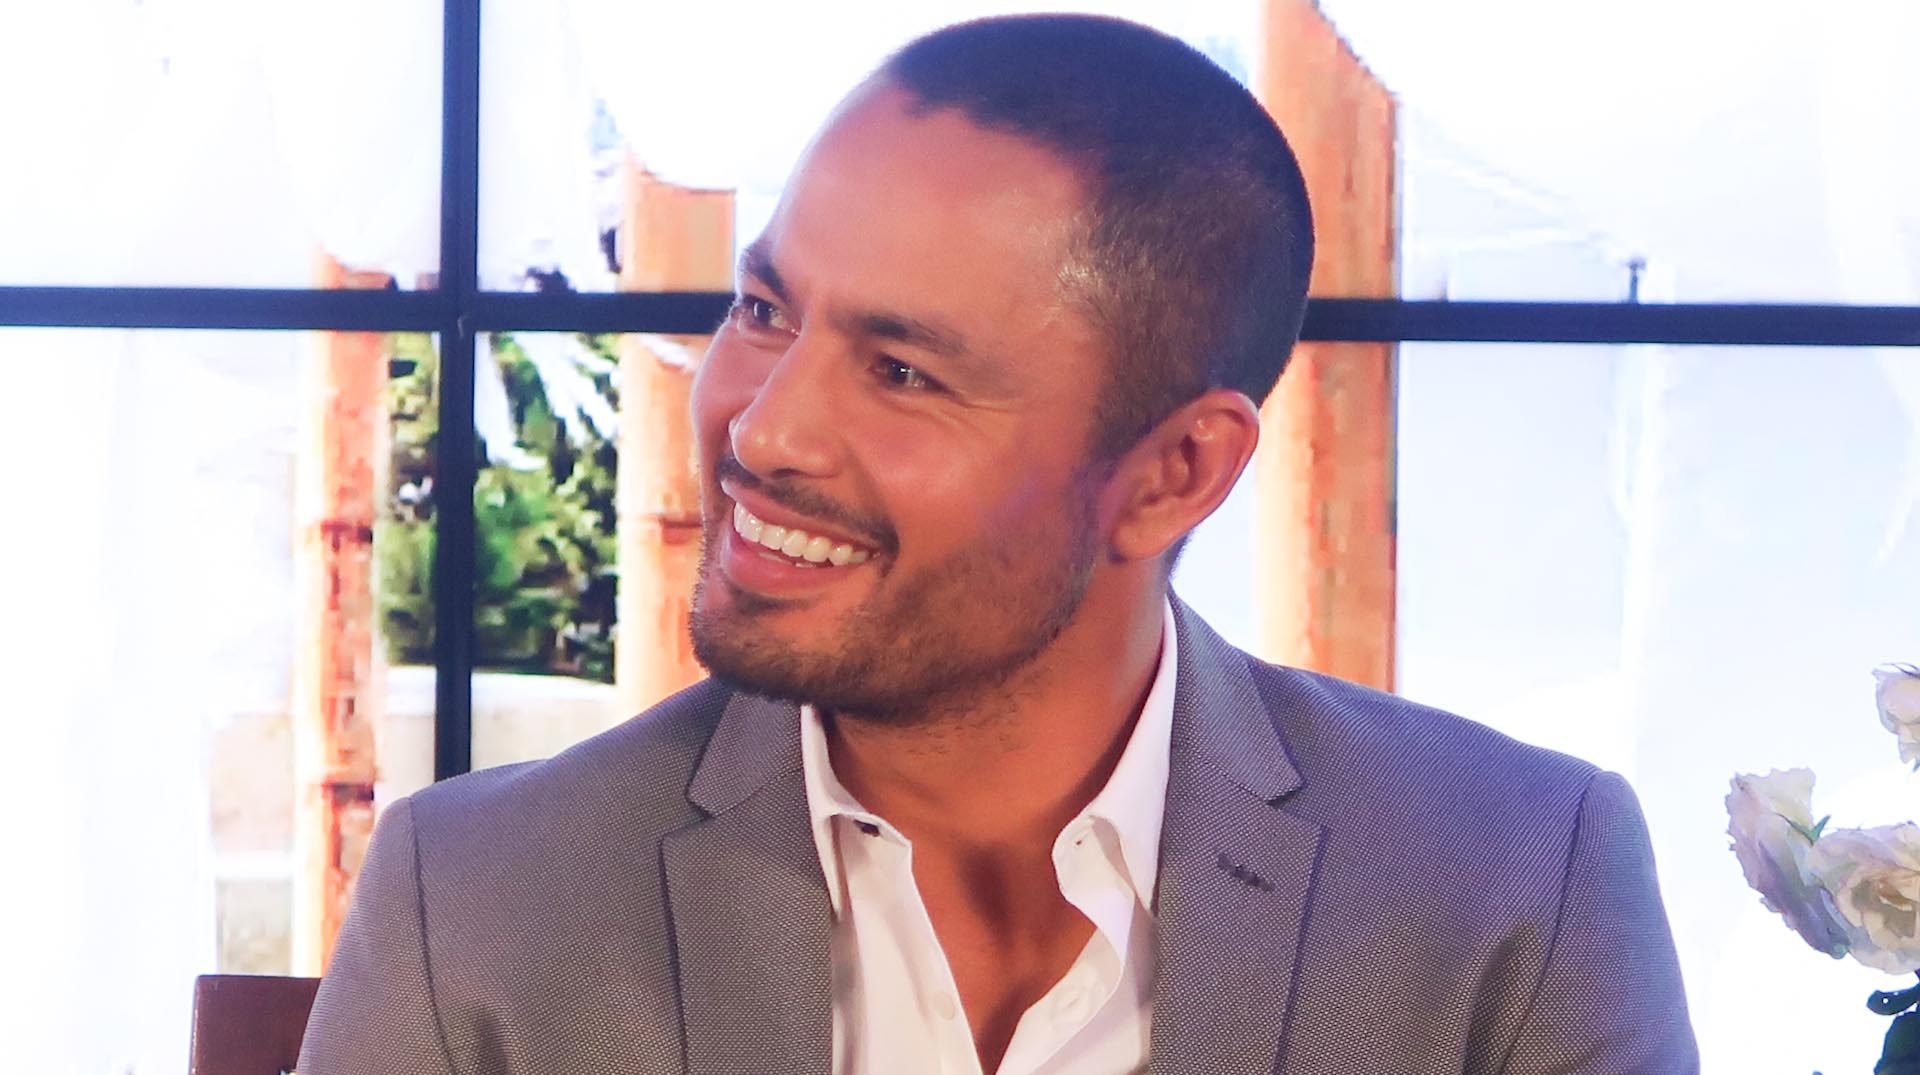 Derek Ramsay signs with GMA 7